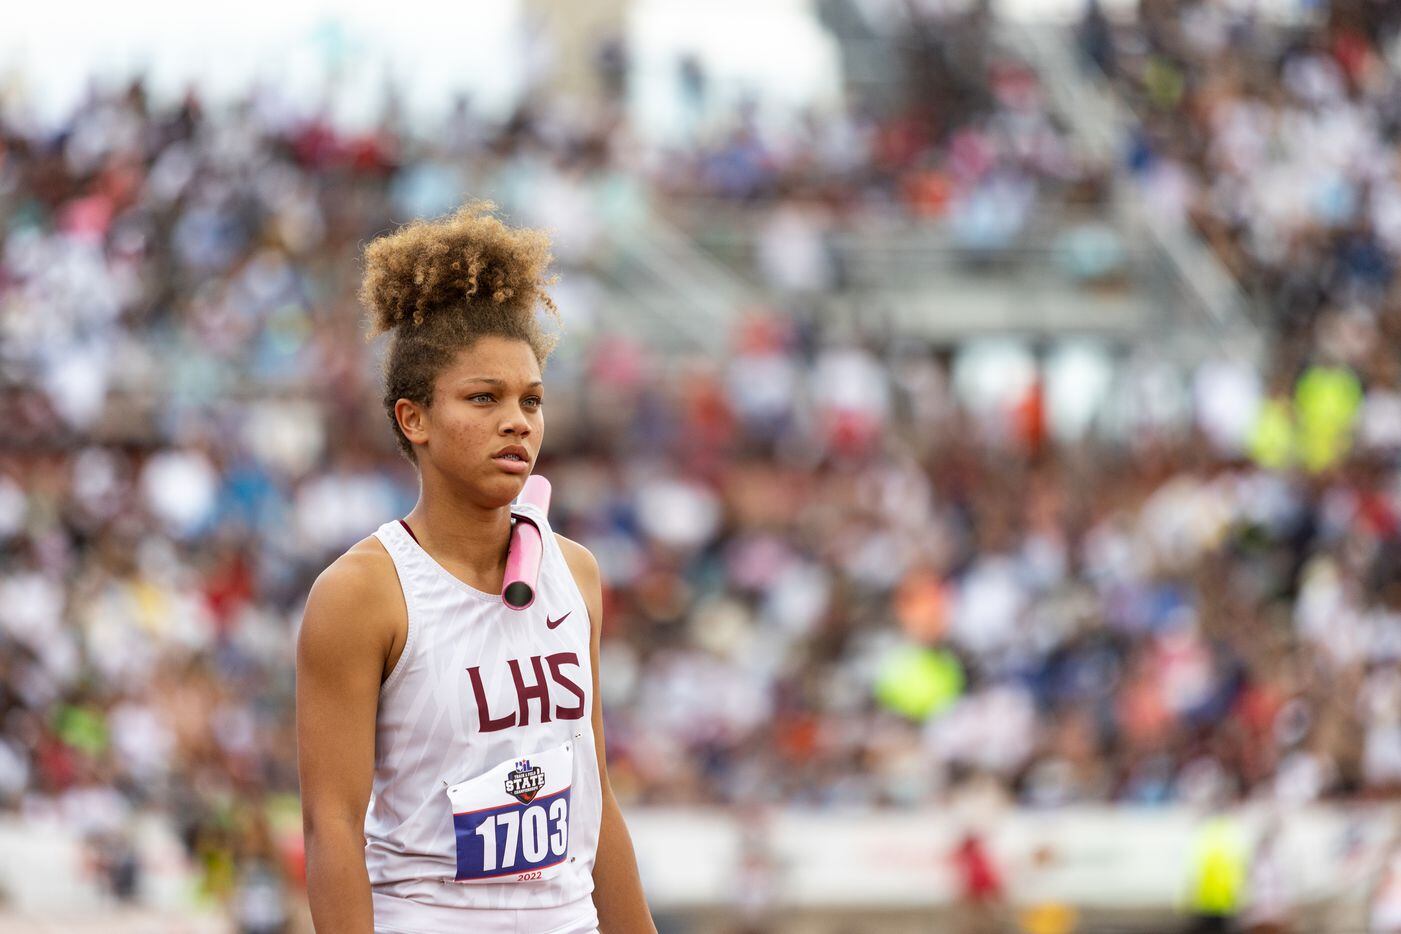 Ryan Allen of Lewisville prepares to race in the girls’ 4x200-meter relay at the UIL Track &...